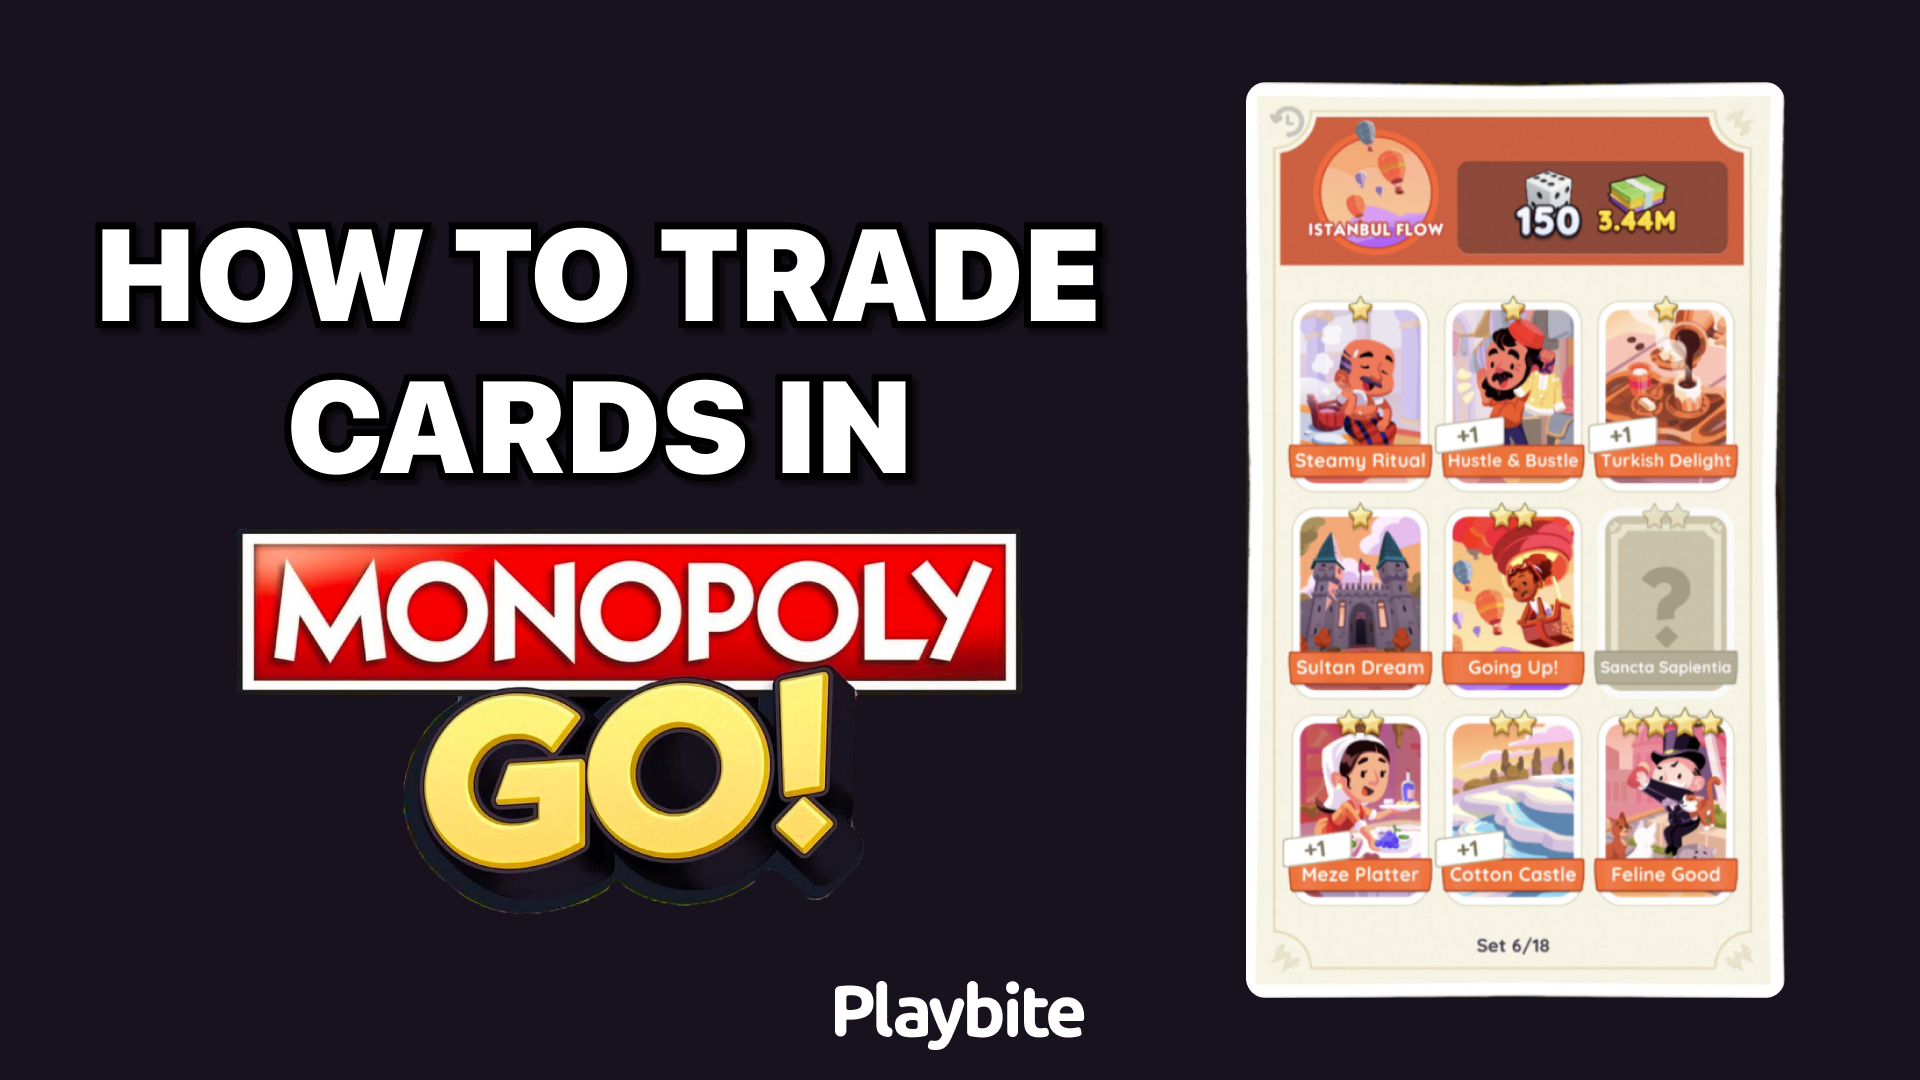 How To Trade Cards In Monopoly GO!